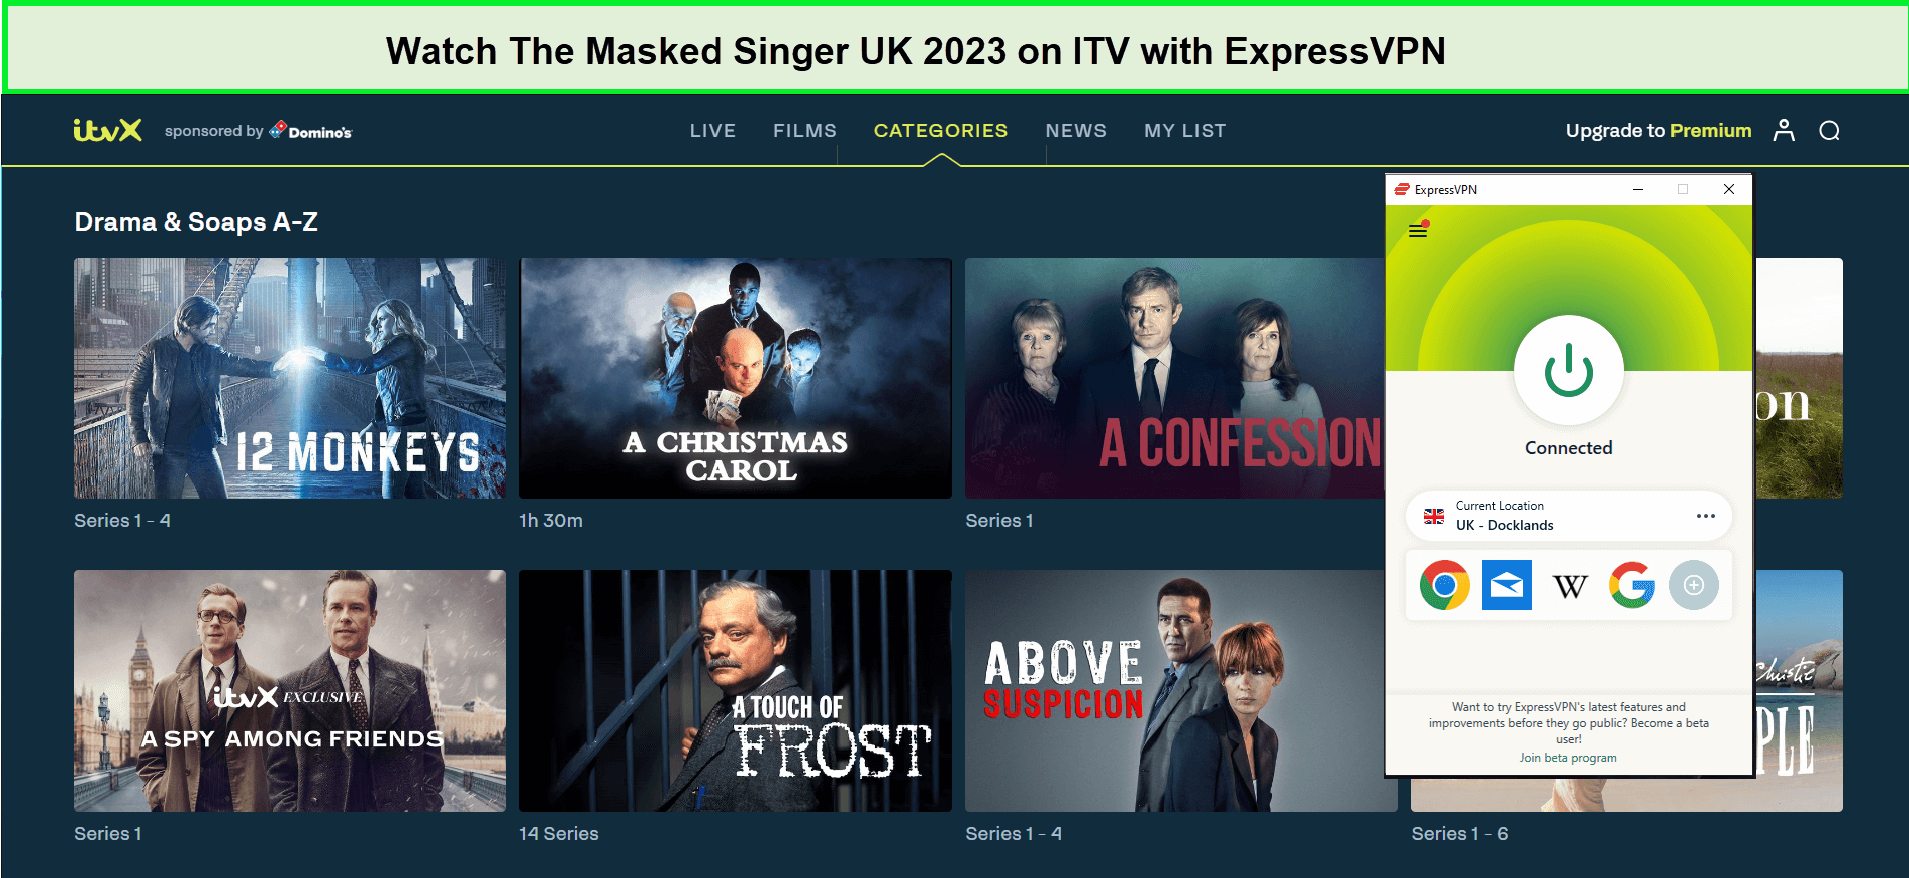 Watch-The-Masked-Singer-UK-2023-in-Japan-on-ITV-with-ExpressVPN